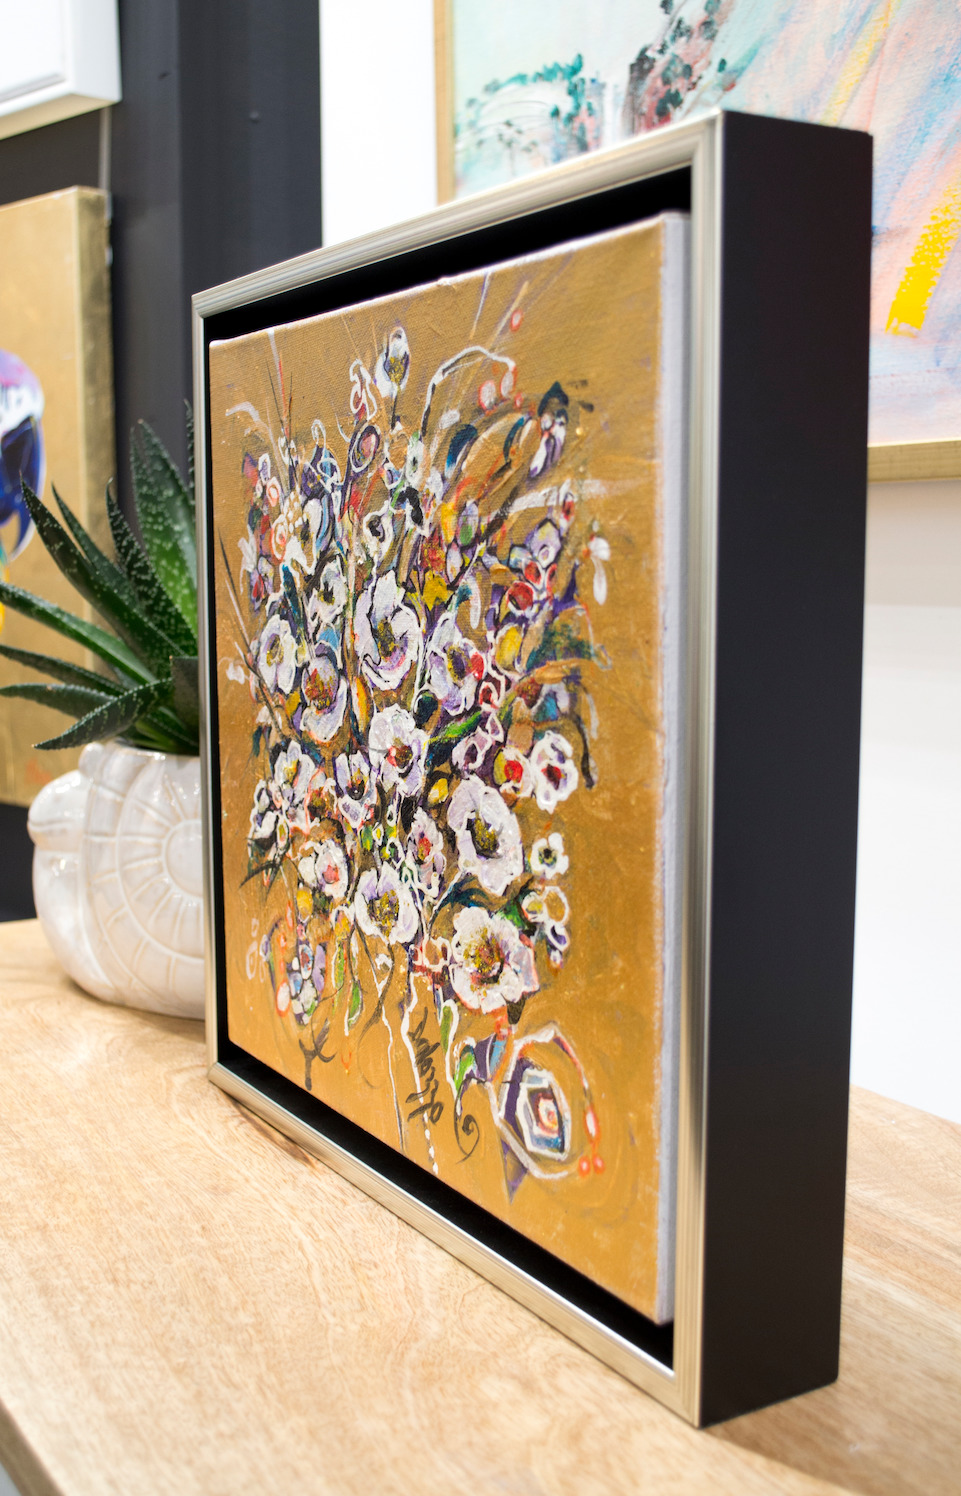 Framed Side View Of Still Life Painting "Wild Flowers Golden" By Lucette Dalozzo